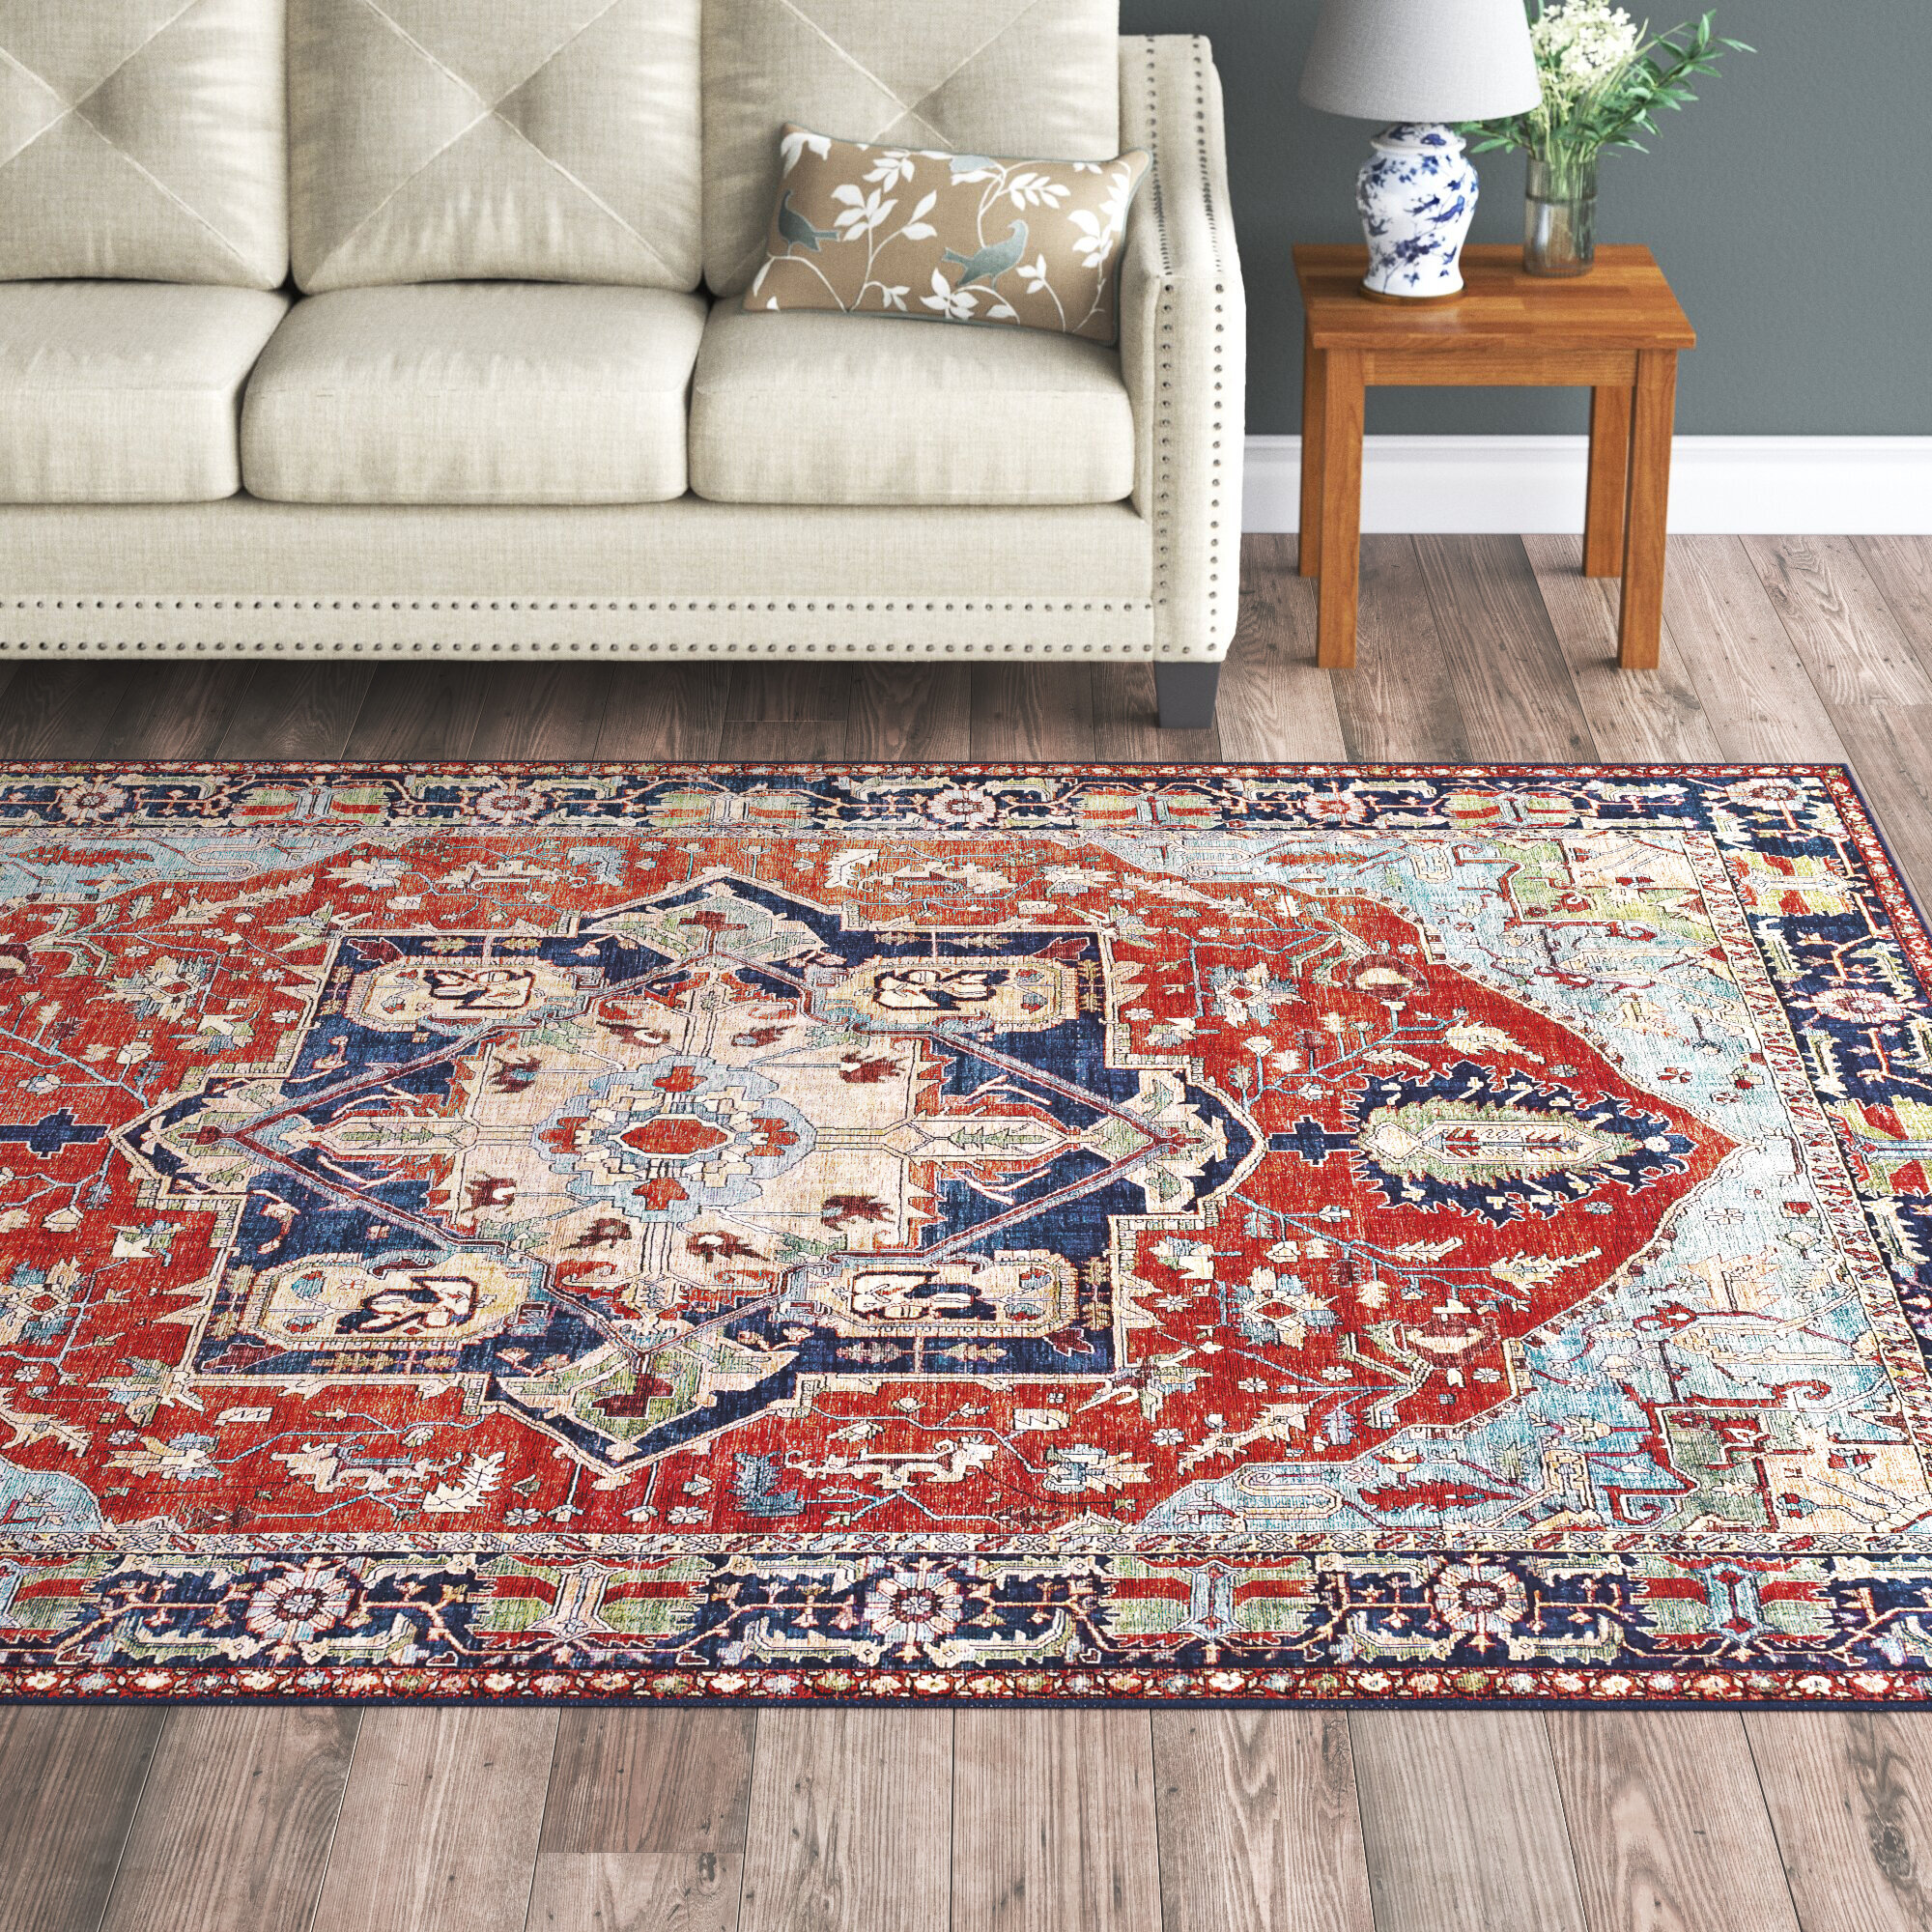 SMALL MEDIUM EXTRA LARGE RUG ORIENTAL CARPET TRADITIONAL PATTERN WOOL RED RUG 